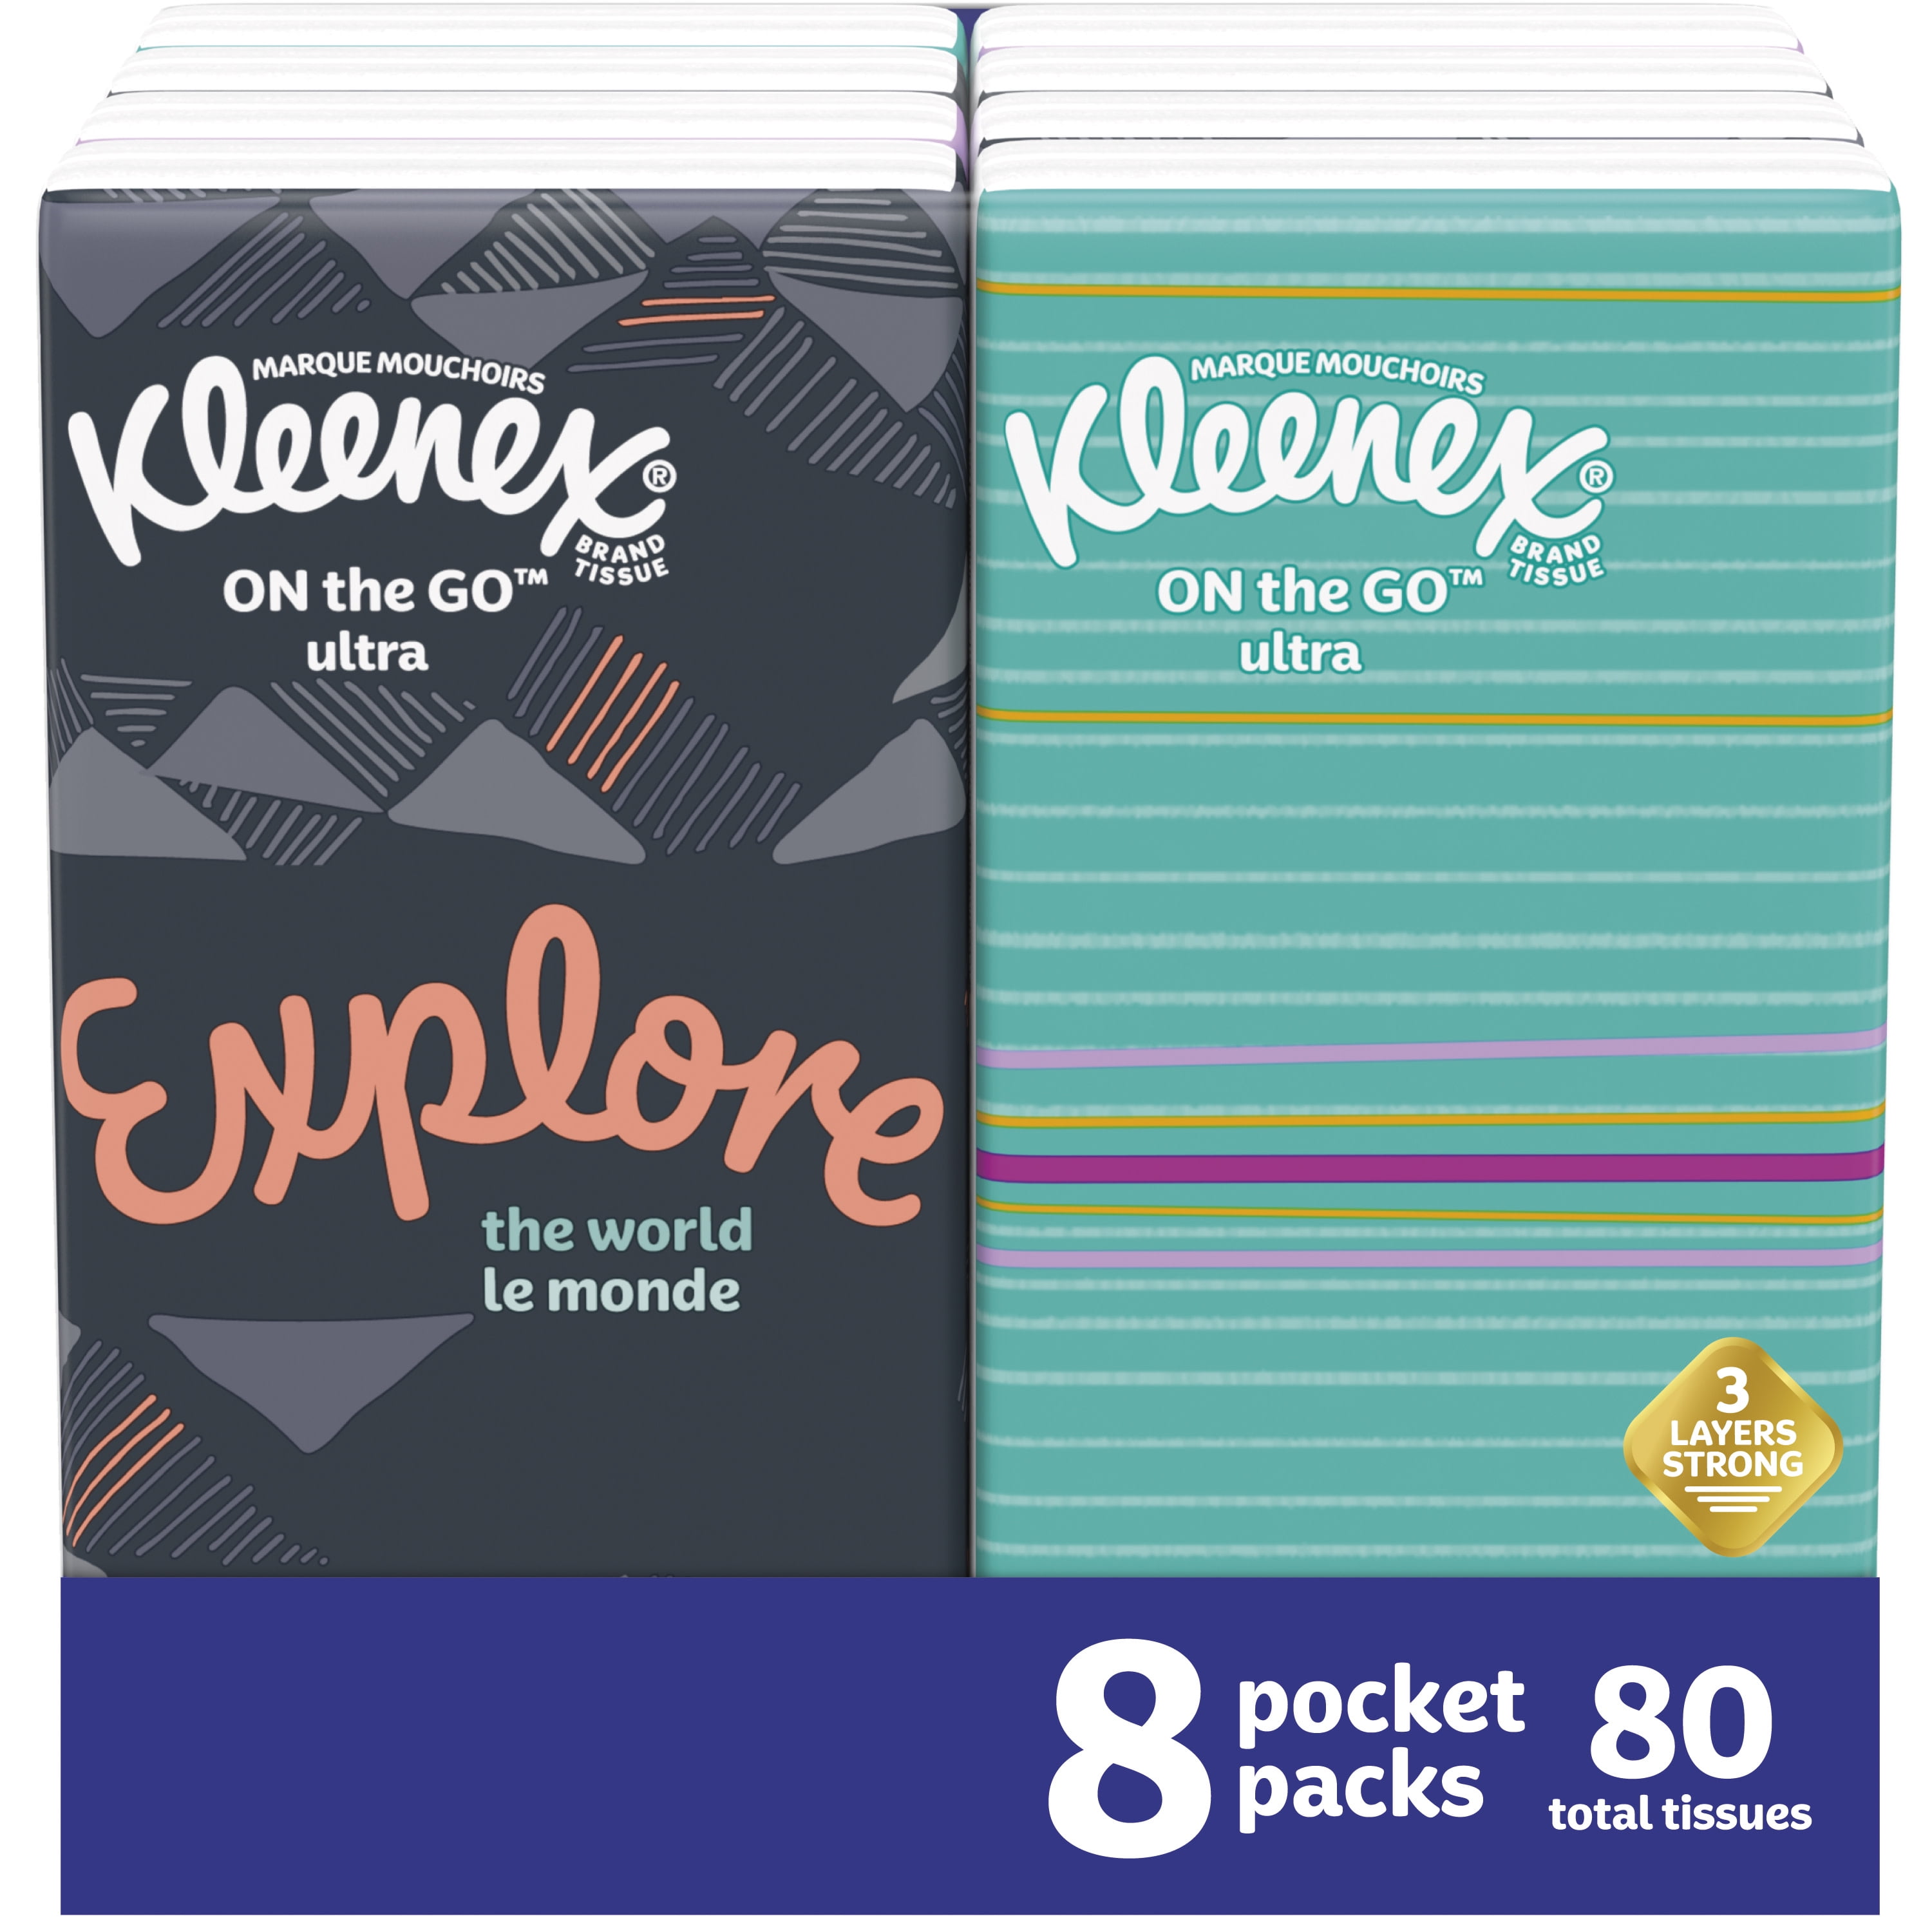 Facial Tissue 8 Pocket Packs 10 3-ply Tissues Per Pack Travel Size 